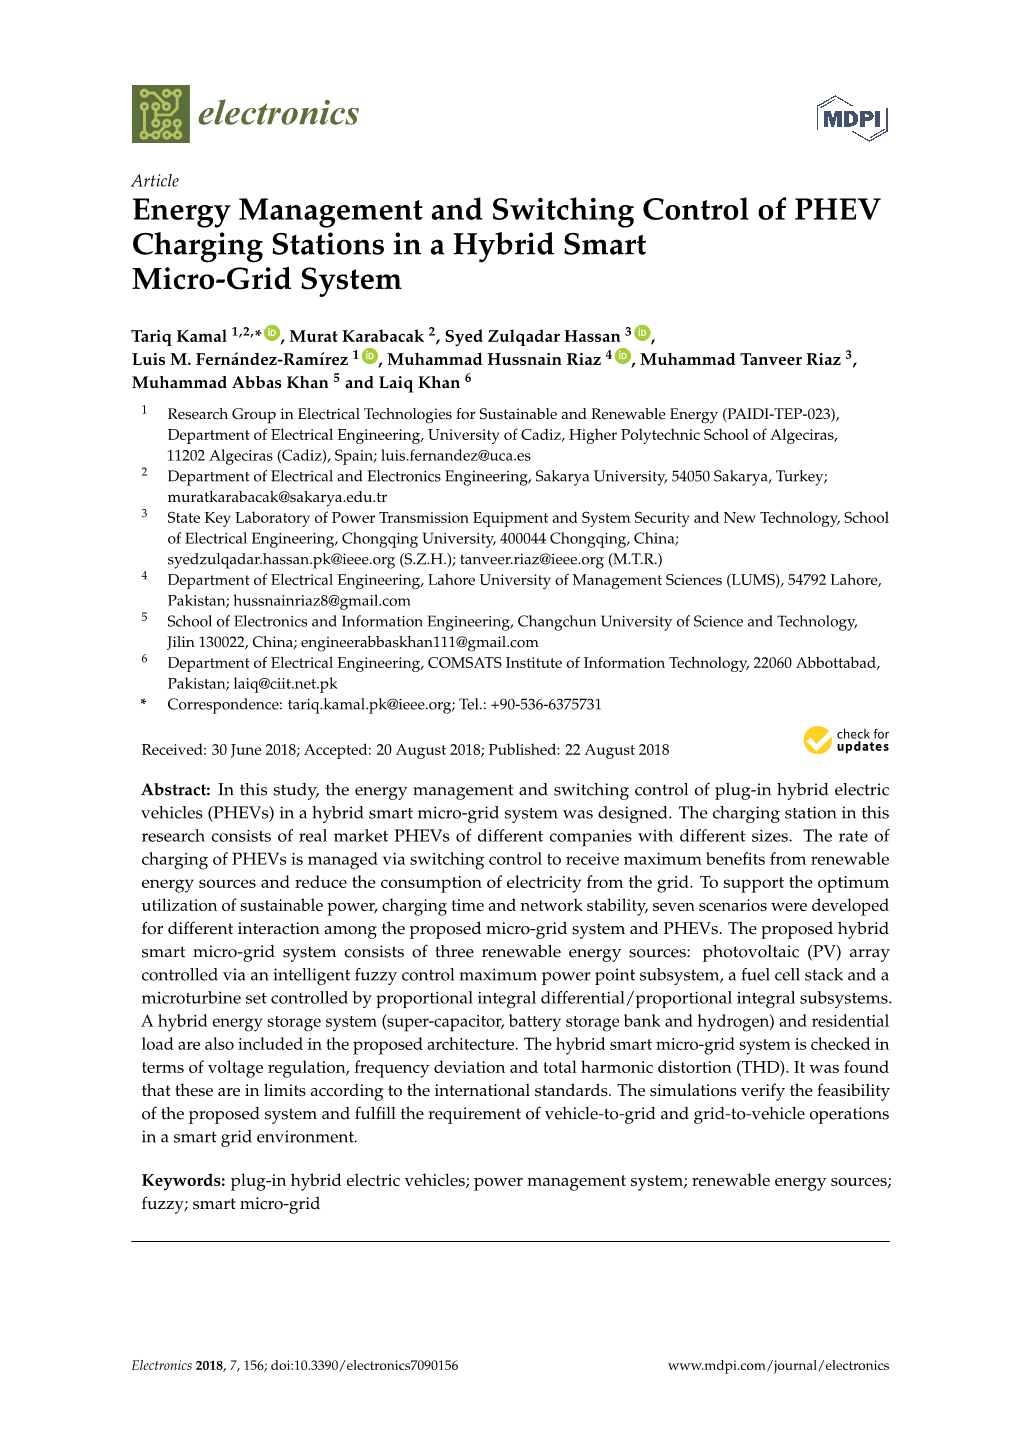 Energy Management and Switching Control of PHEV Charging Stations in a Hybrid Smart Micro-Grid System